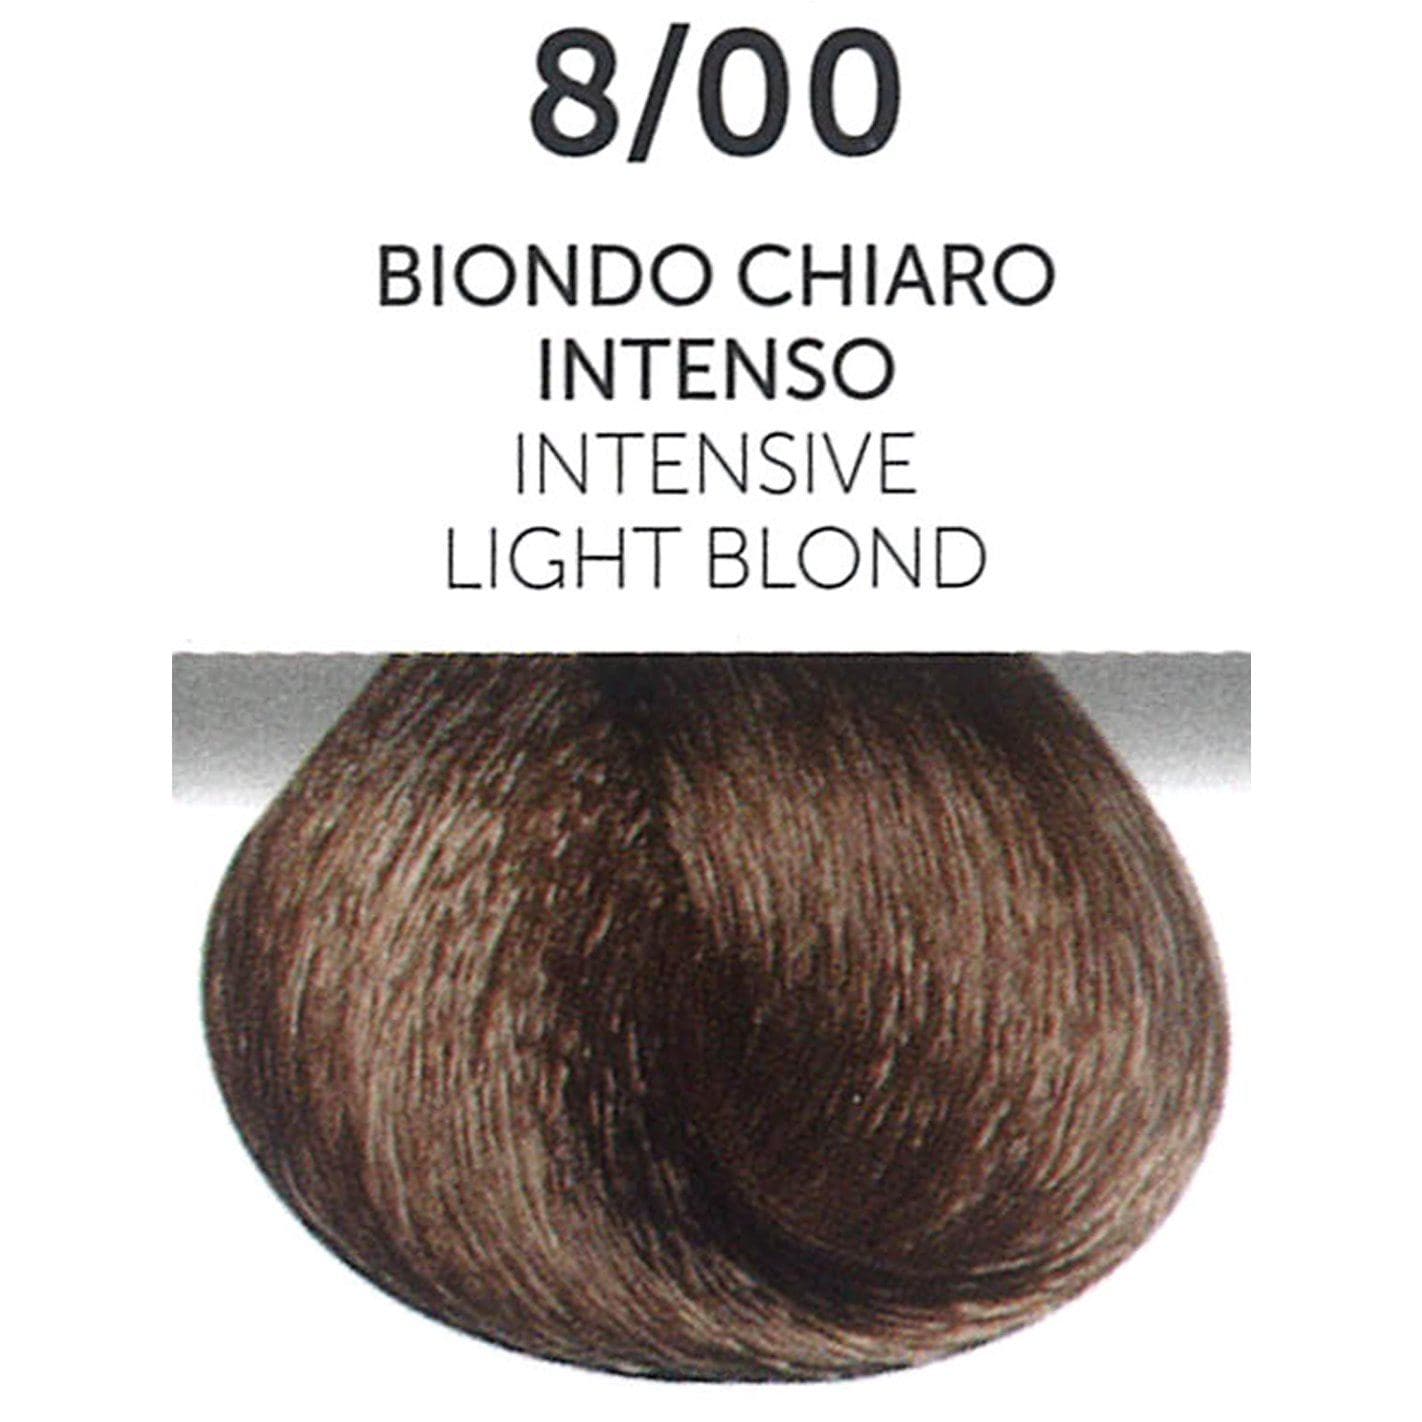 8/00 Intensive Light Blond | Permanent Hair Color | Perlacolor | OYSTER - SH Salons